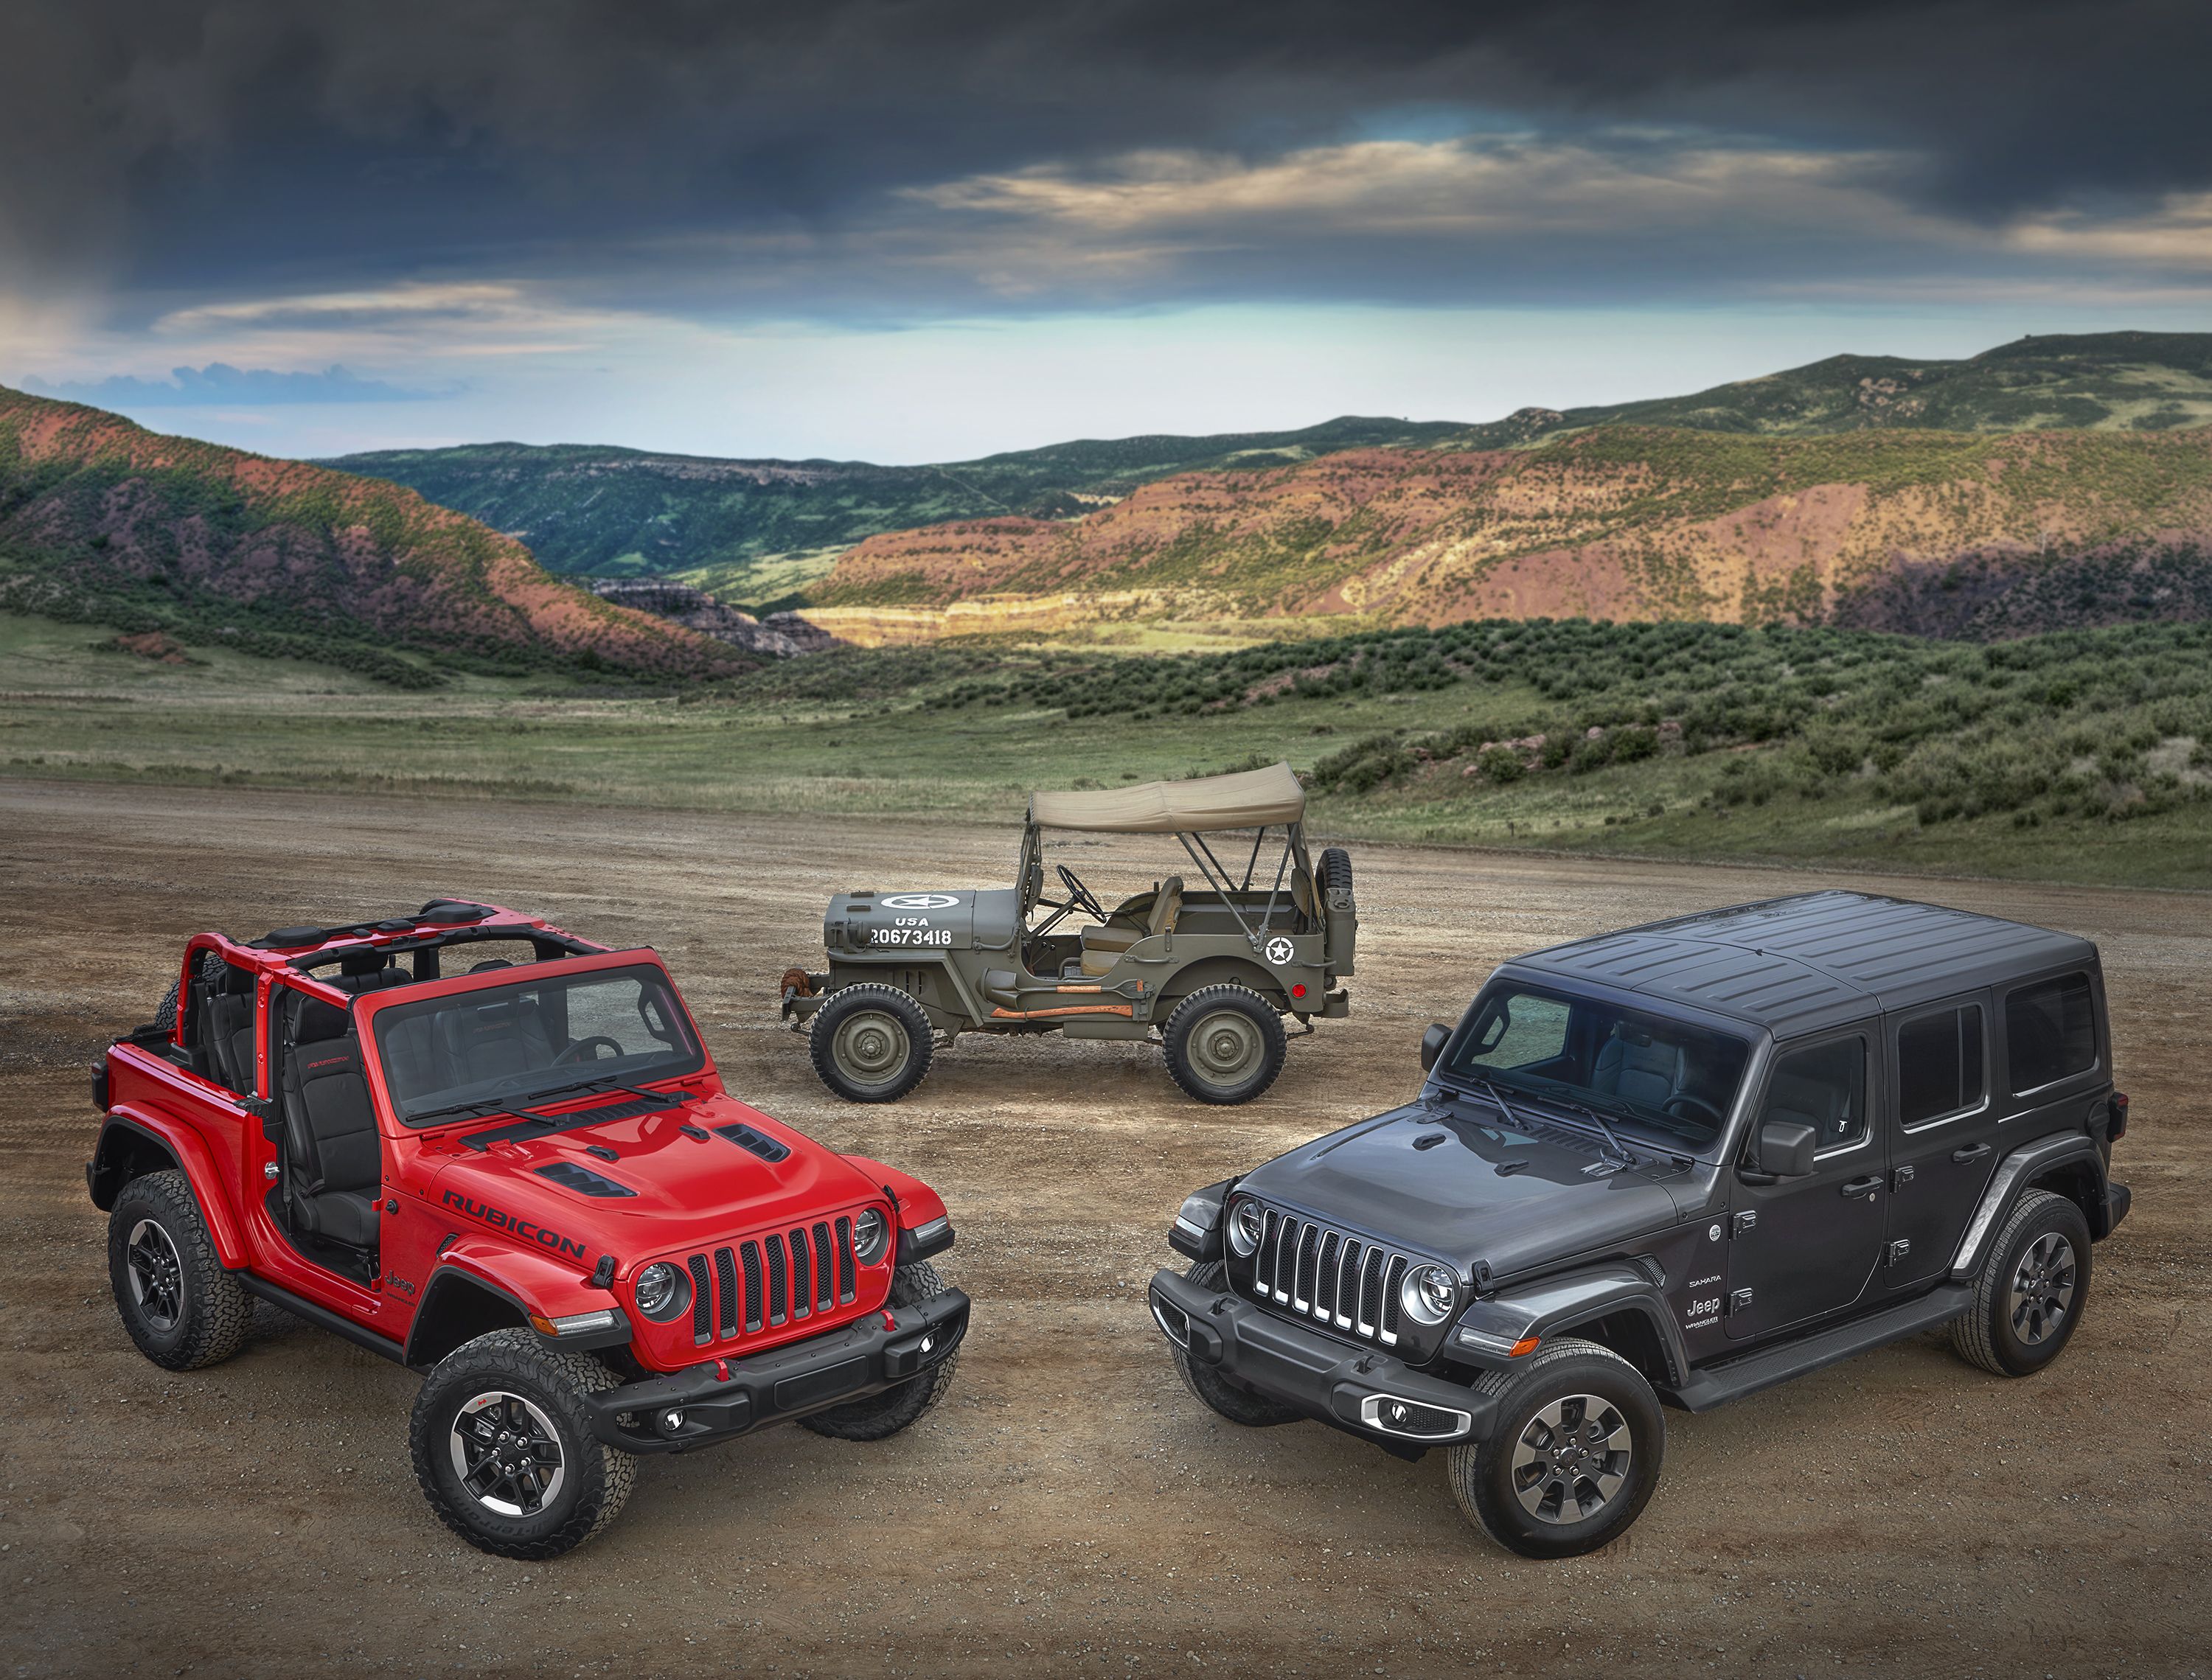 2018 Jeep Wrangler Official Specs From LA Auto Show 2017 - New JL Rubicon  Features